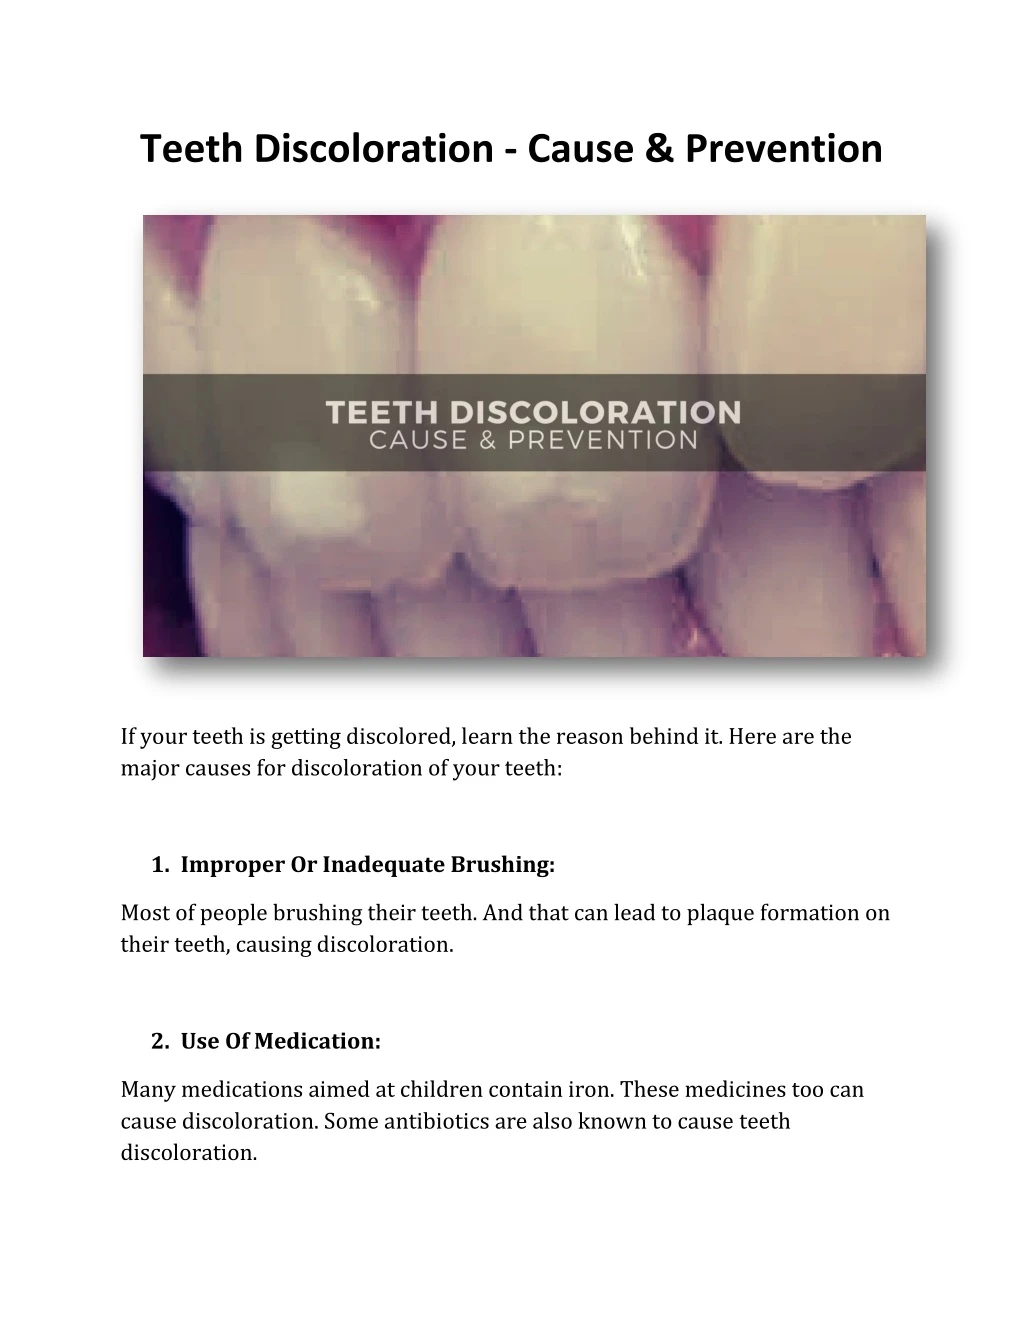 teeth discoloration cause prevention